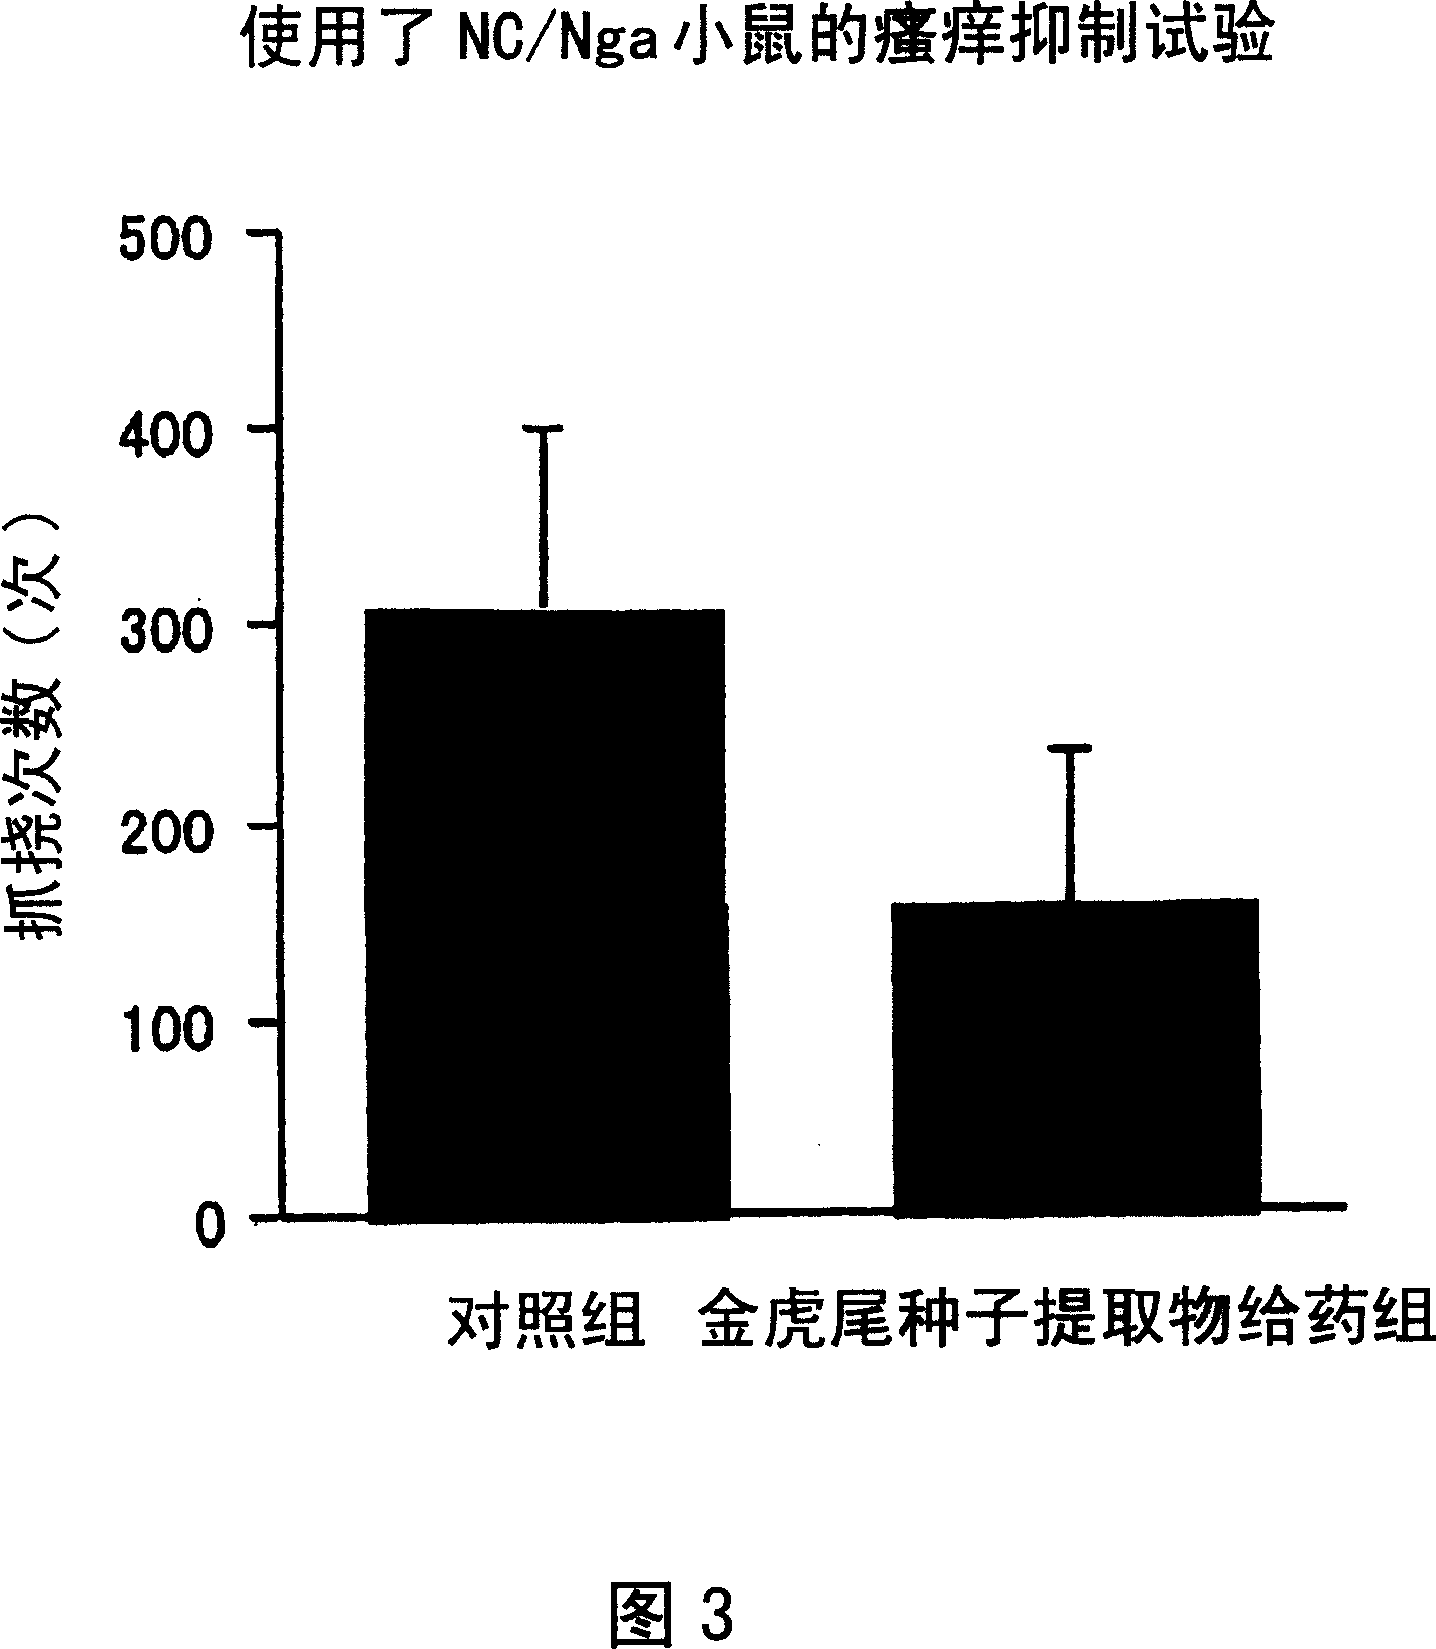 Nerve growth factor production inhibitor and external preparation for skin, cosmetic, quasi medicine, itch prophylactic and therapeutic agent and atopic dermatitis therapeutic agent mixed with the ner